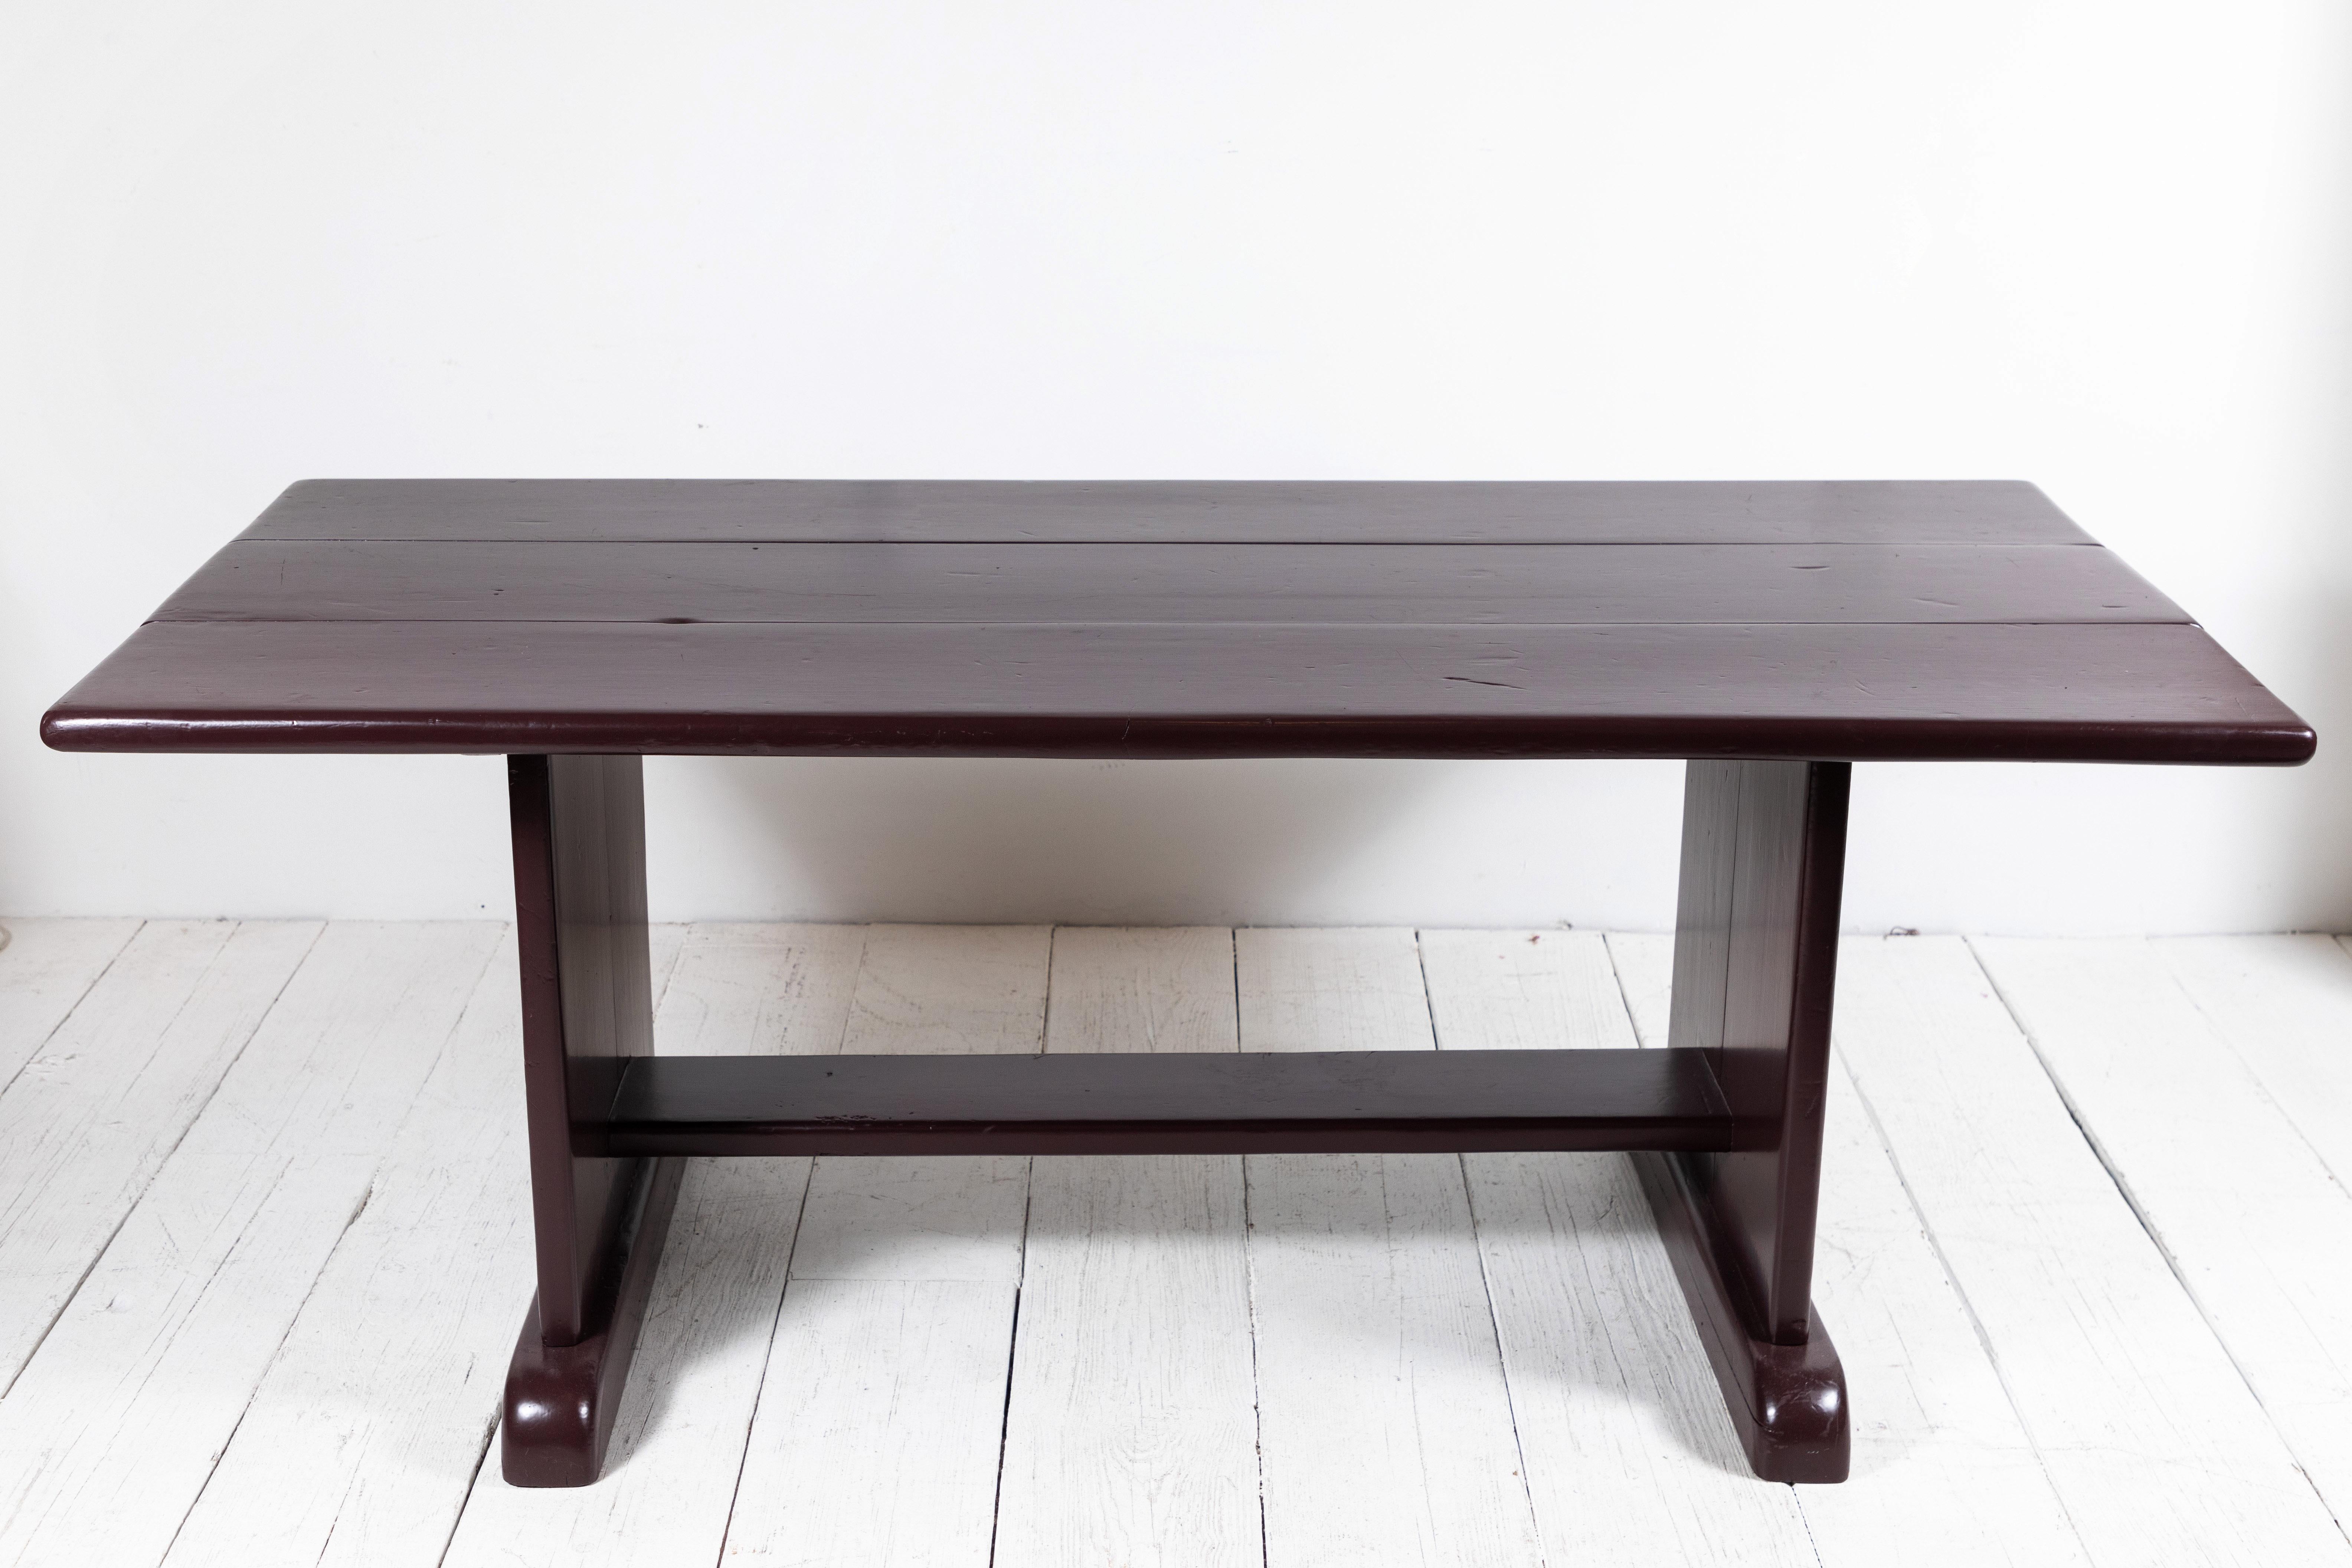 Painted deep aubergine farm table with sold paneled trestle base.